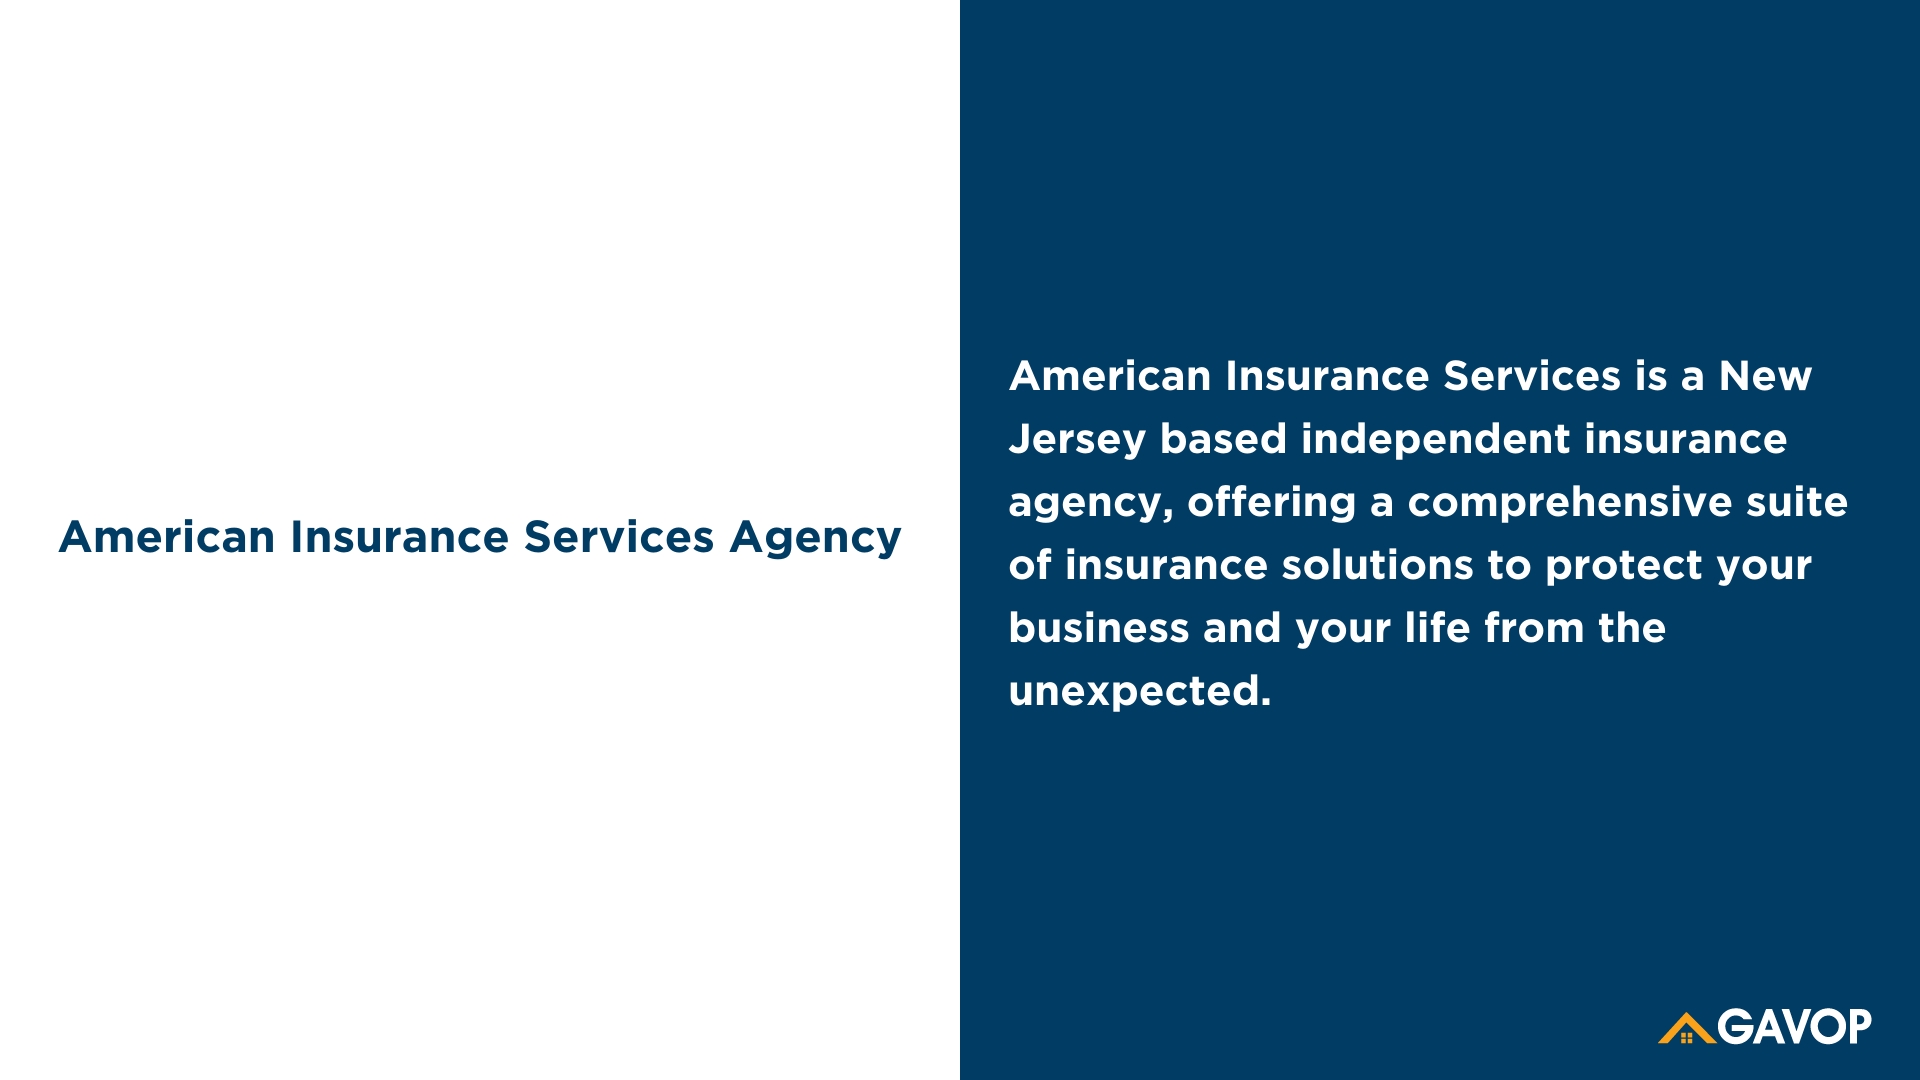 American Insurance Services